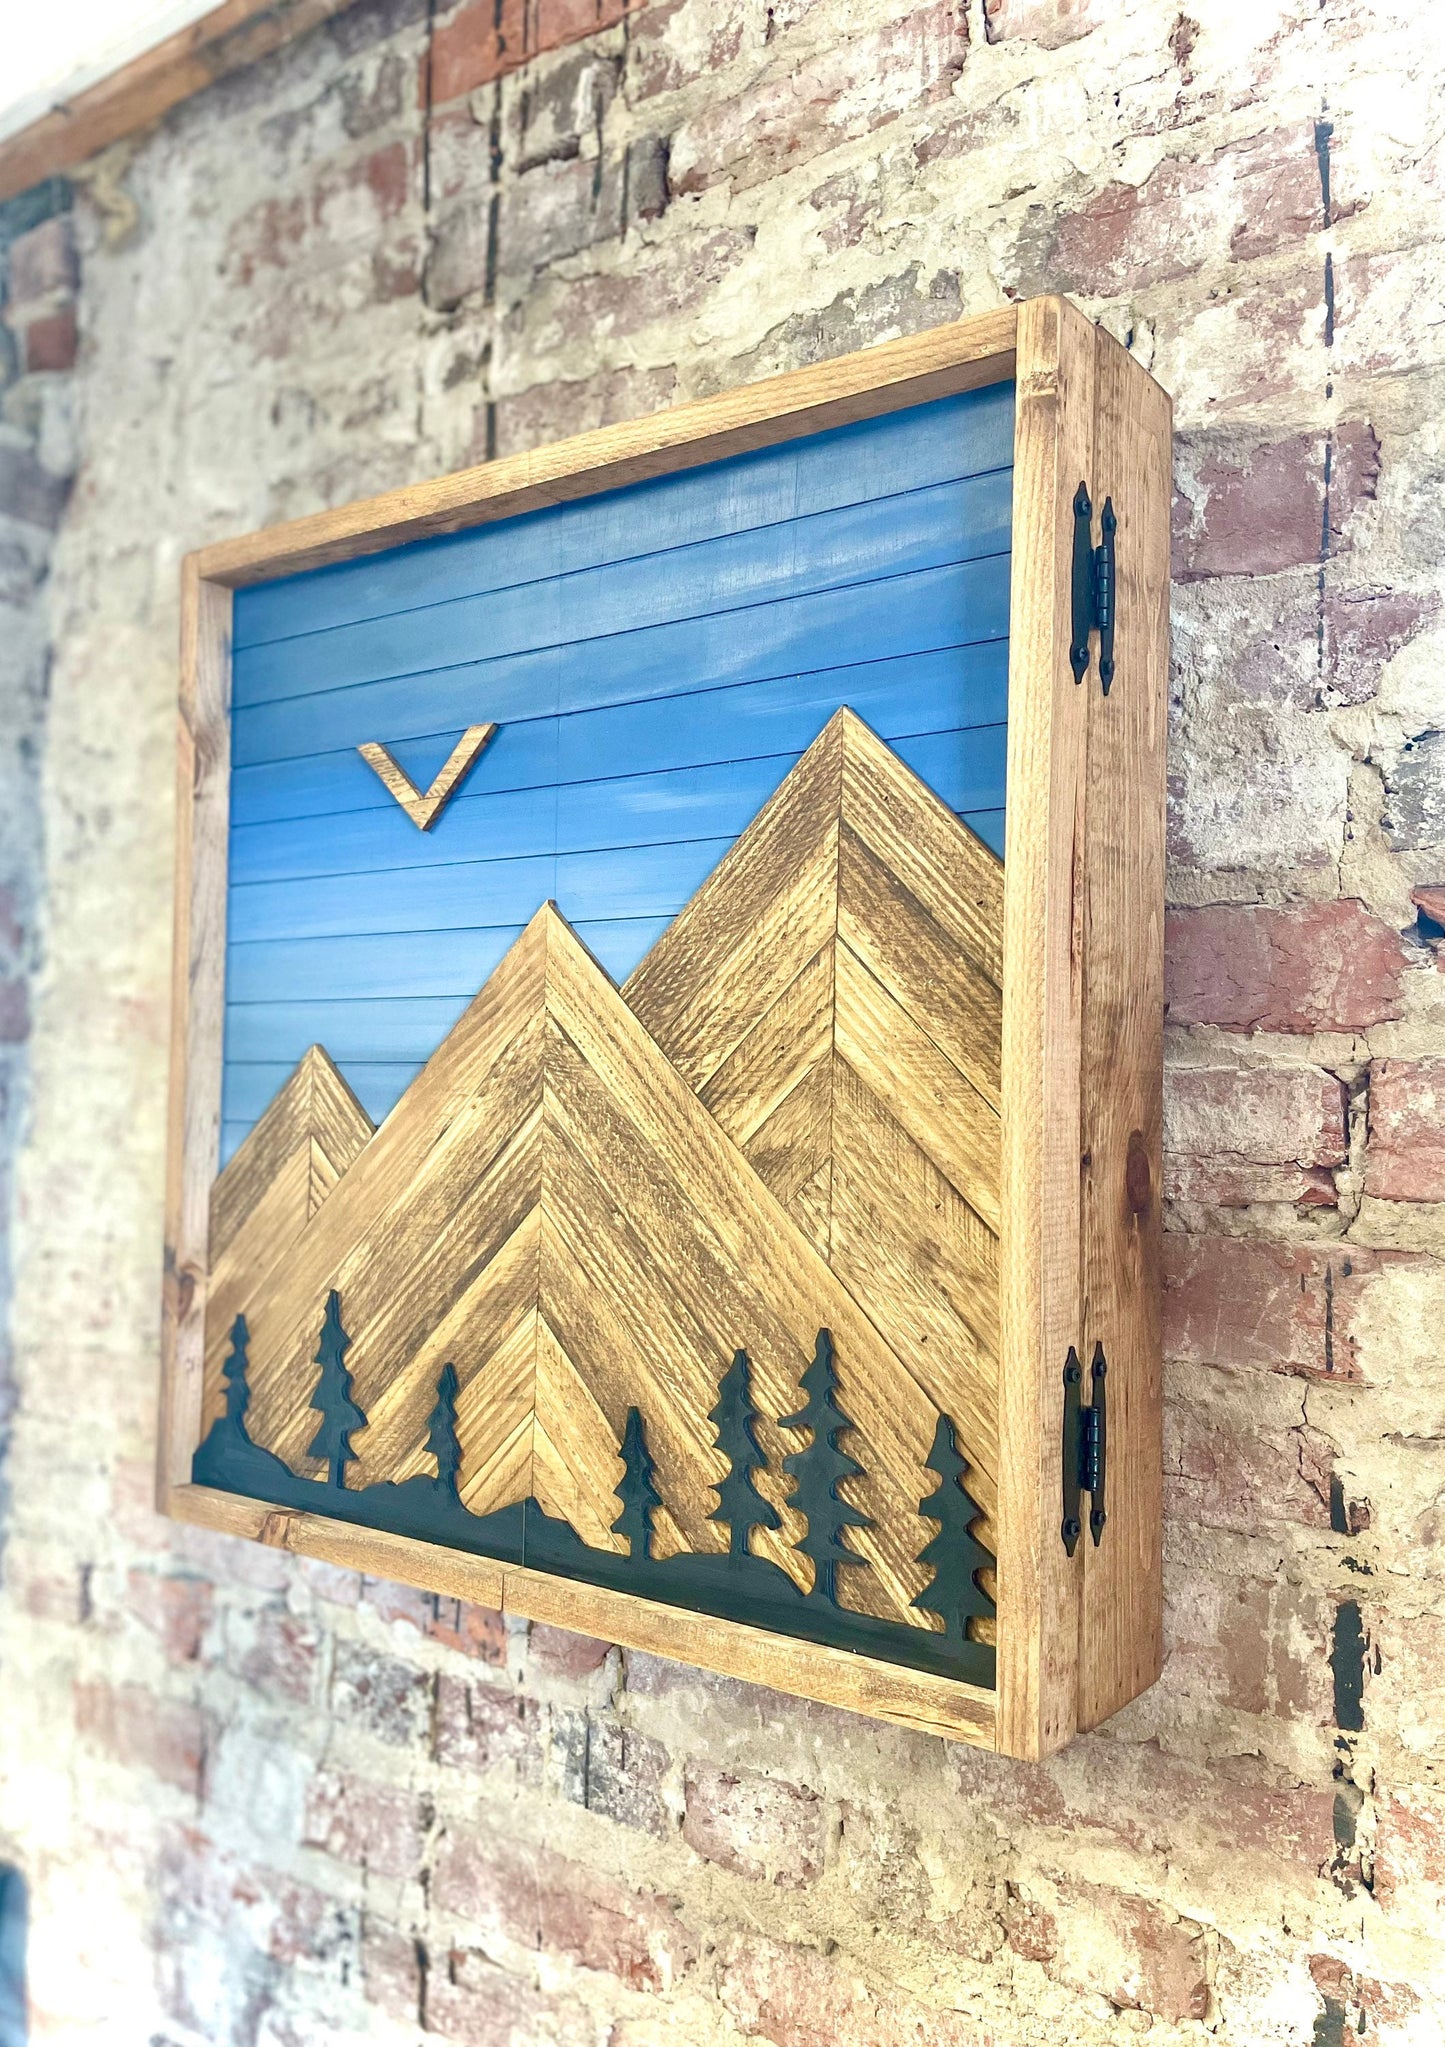 Rustic Dartboard Cabinet - Rustic Blue Sky w/ Trees Mountain Art  26”x26” - Rustic Cabinet - Game Room / Man Cave Art - Wall Decor - Cabinet